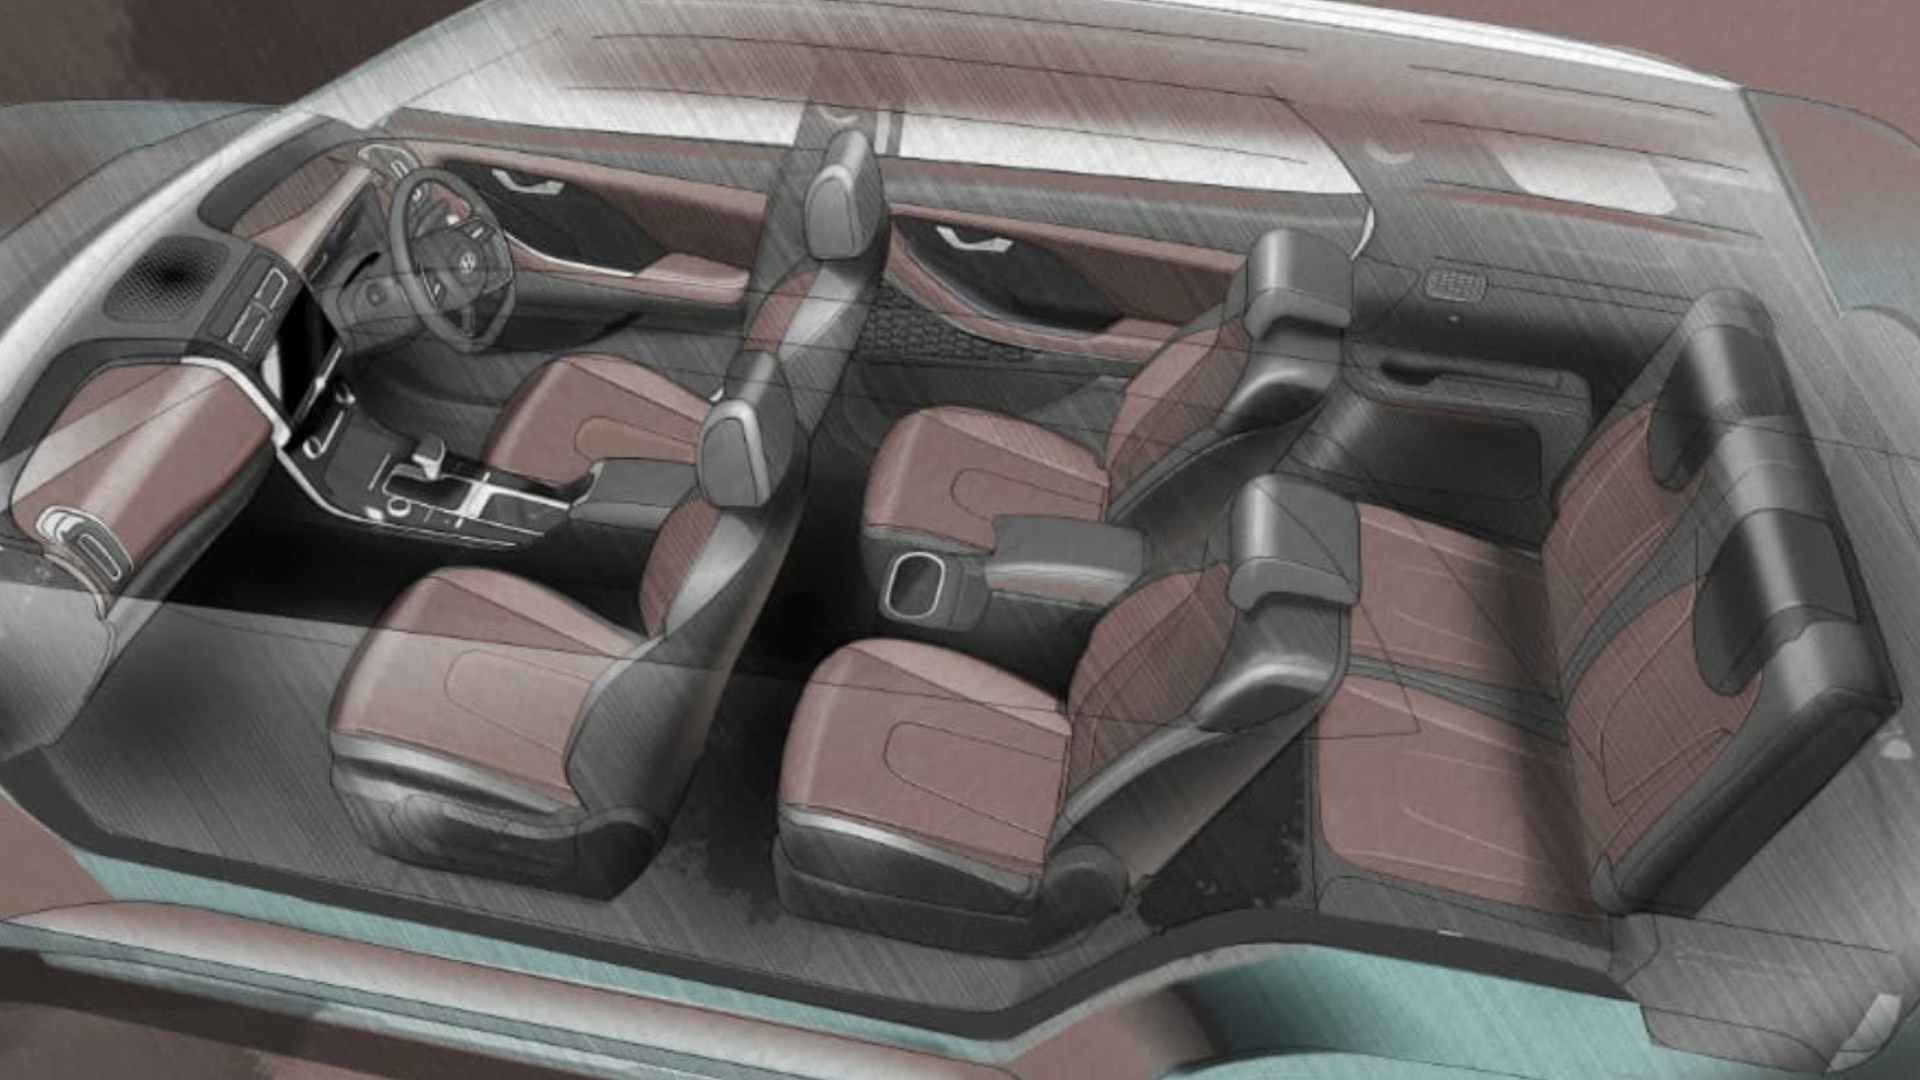 The Hyundai Alcazar's interior sketch confirms there will also be a six-seat variant. Image: Hyundai